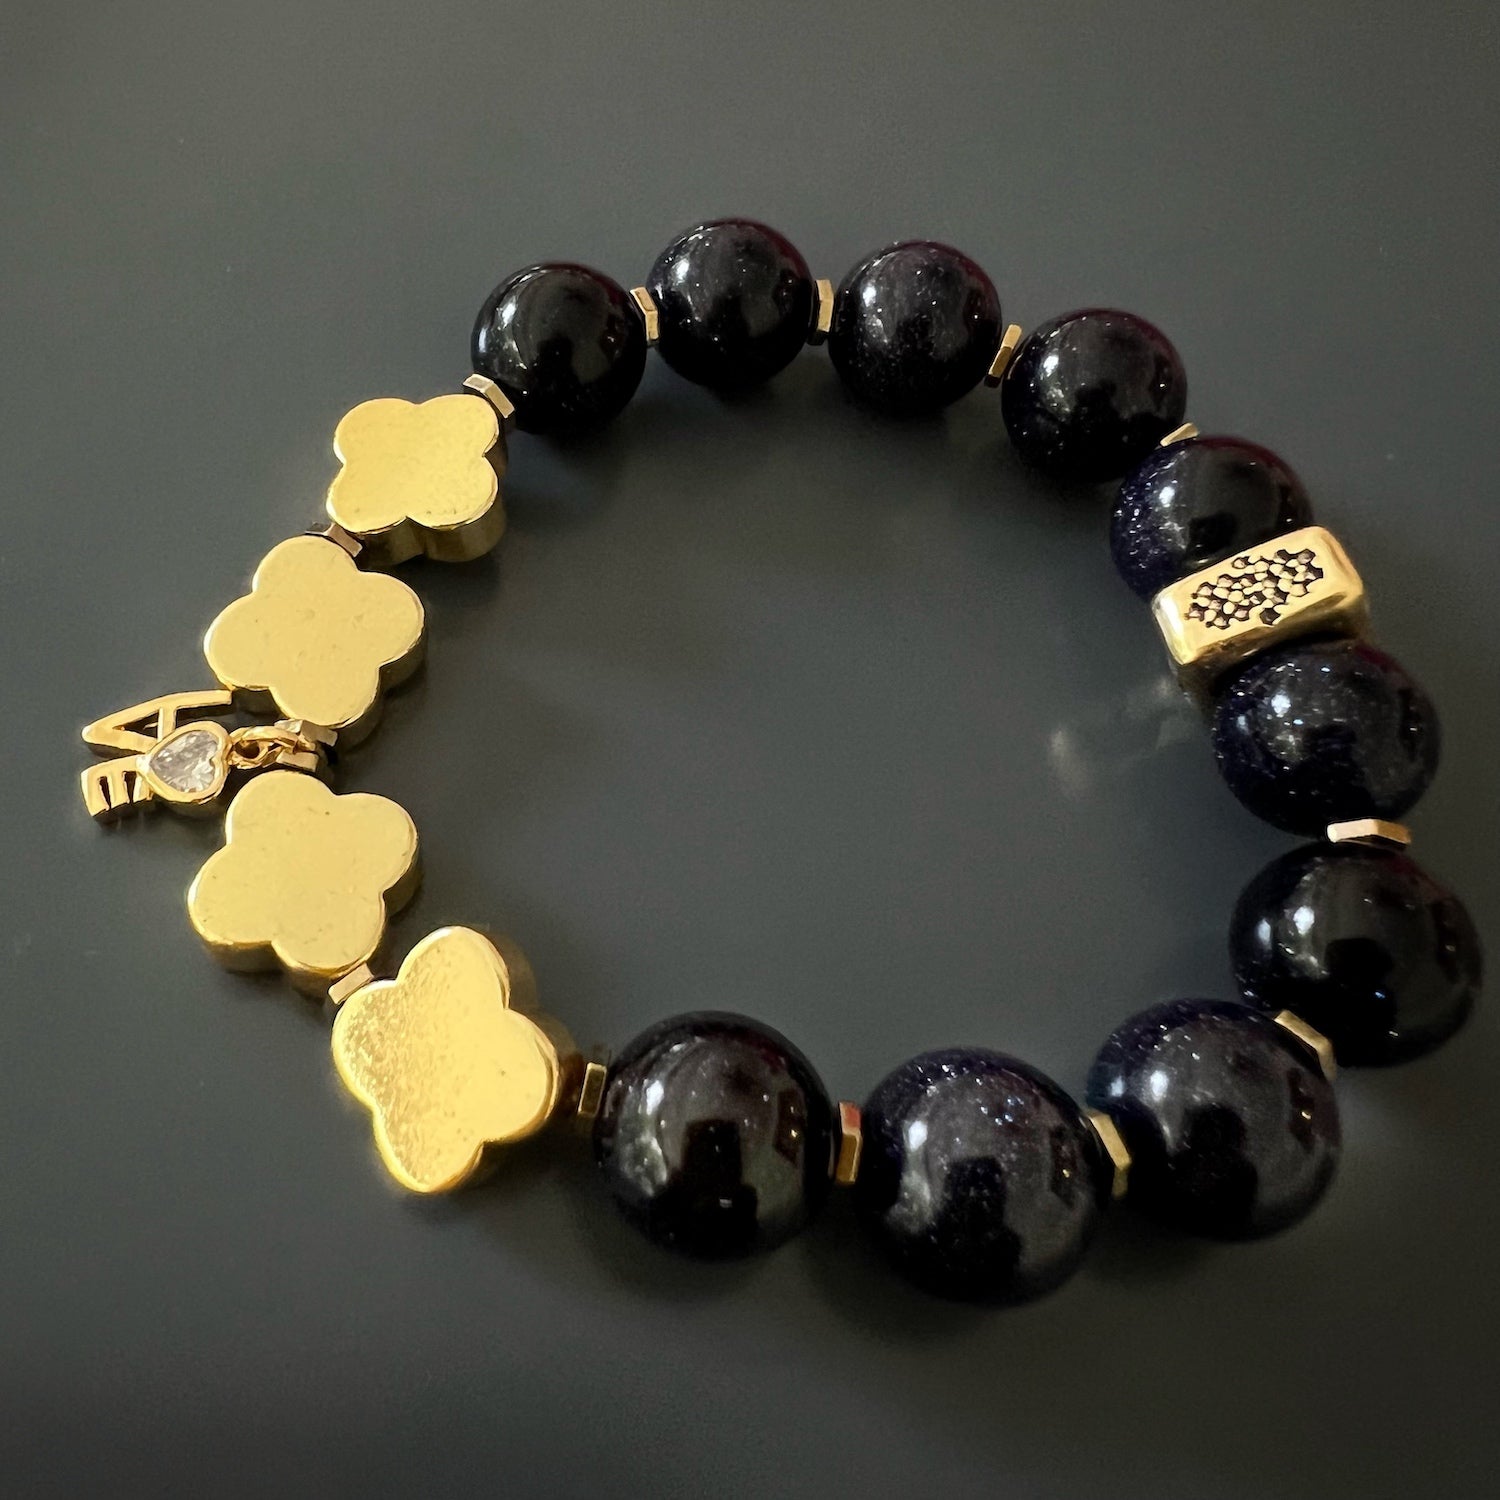 Alhambra Love Bracelet - Handmade jewelry piece featuring a gold plated love charm adorned with a simulated diamond, inspired by the beauty of the Alhambra.